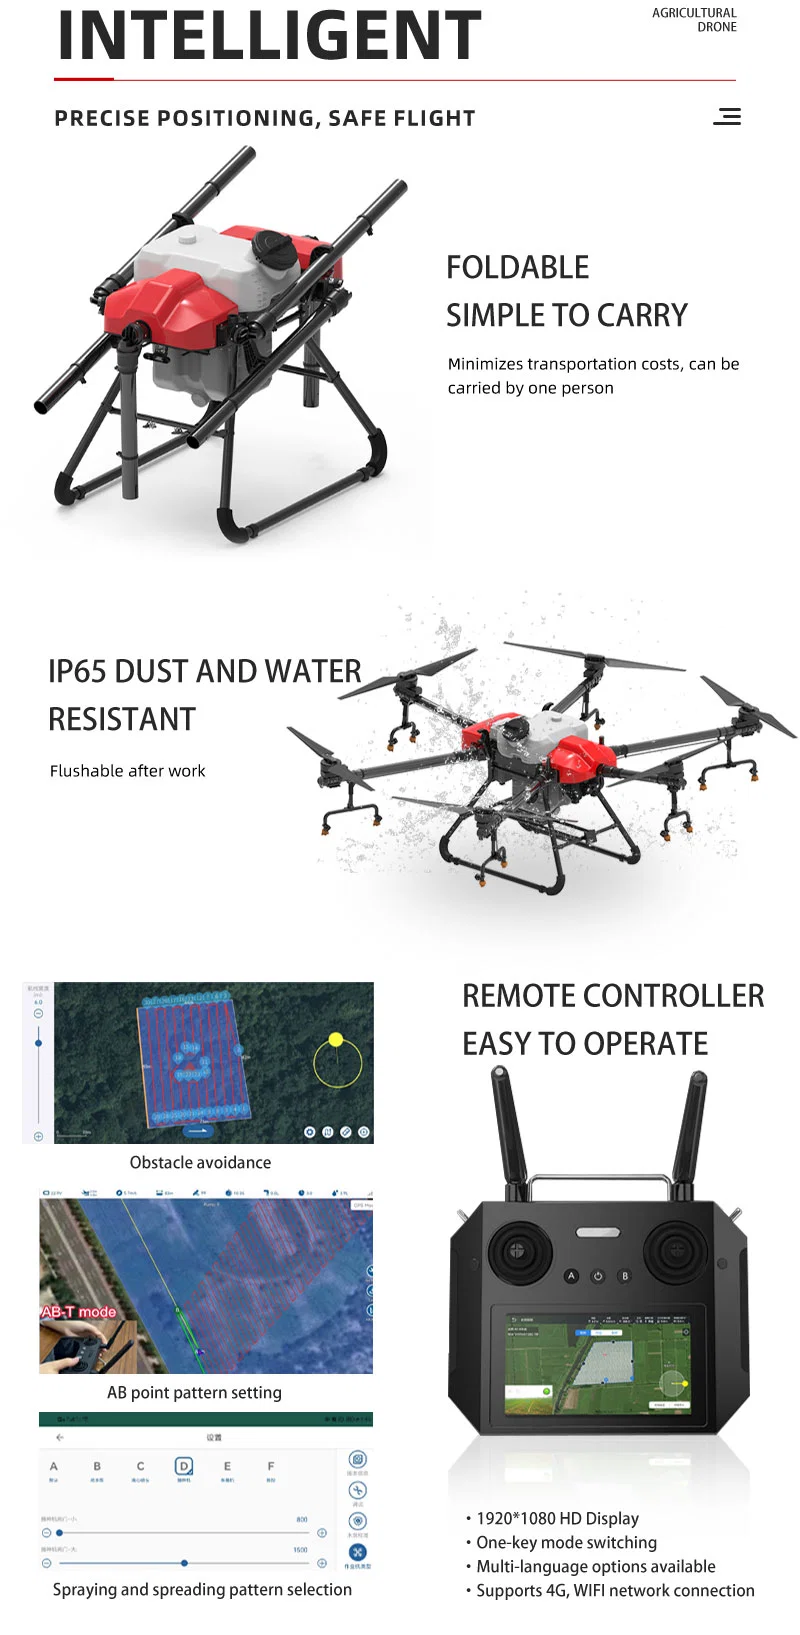 Hf T30 Agri Pesticide Fungicide Nutrients Insecticide Fumigation GPS Using Drones to Spray Crops Sprayer Drone Fumigaz with Sowing Manure Fertilizer Spreader